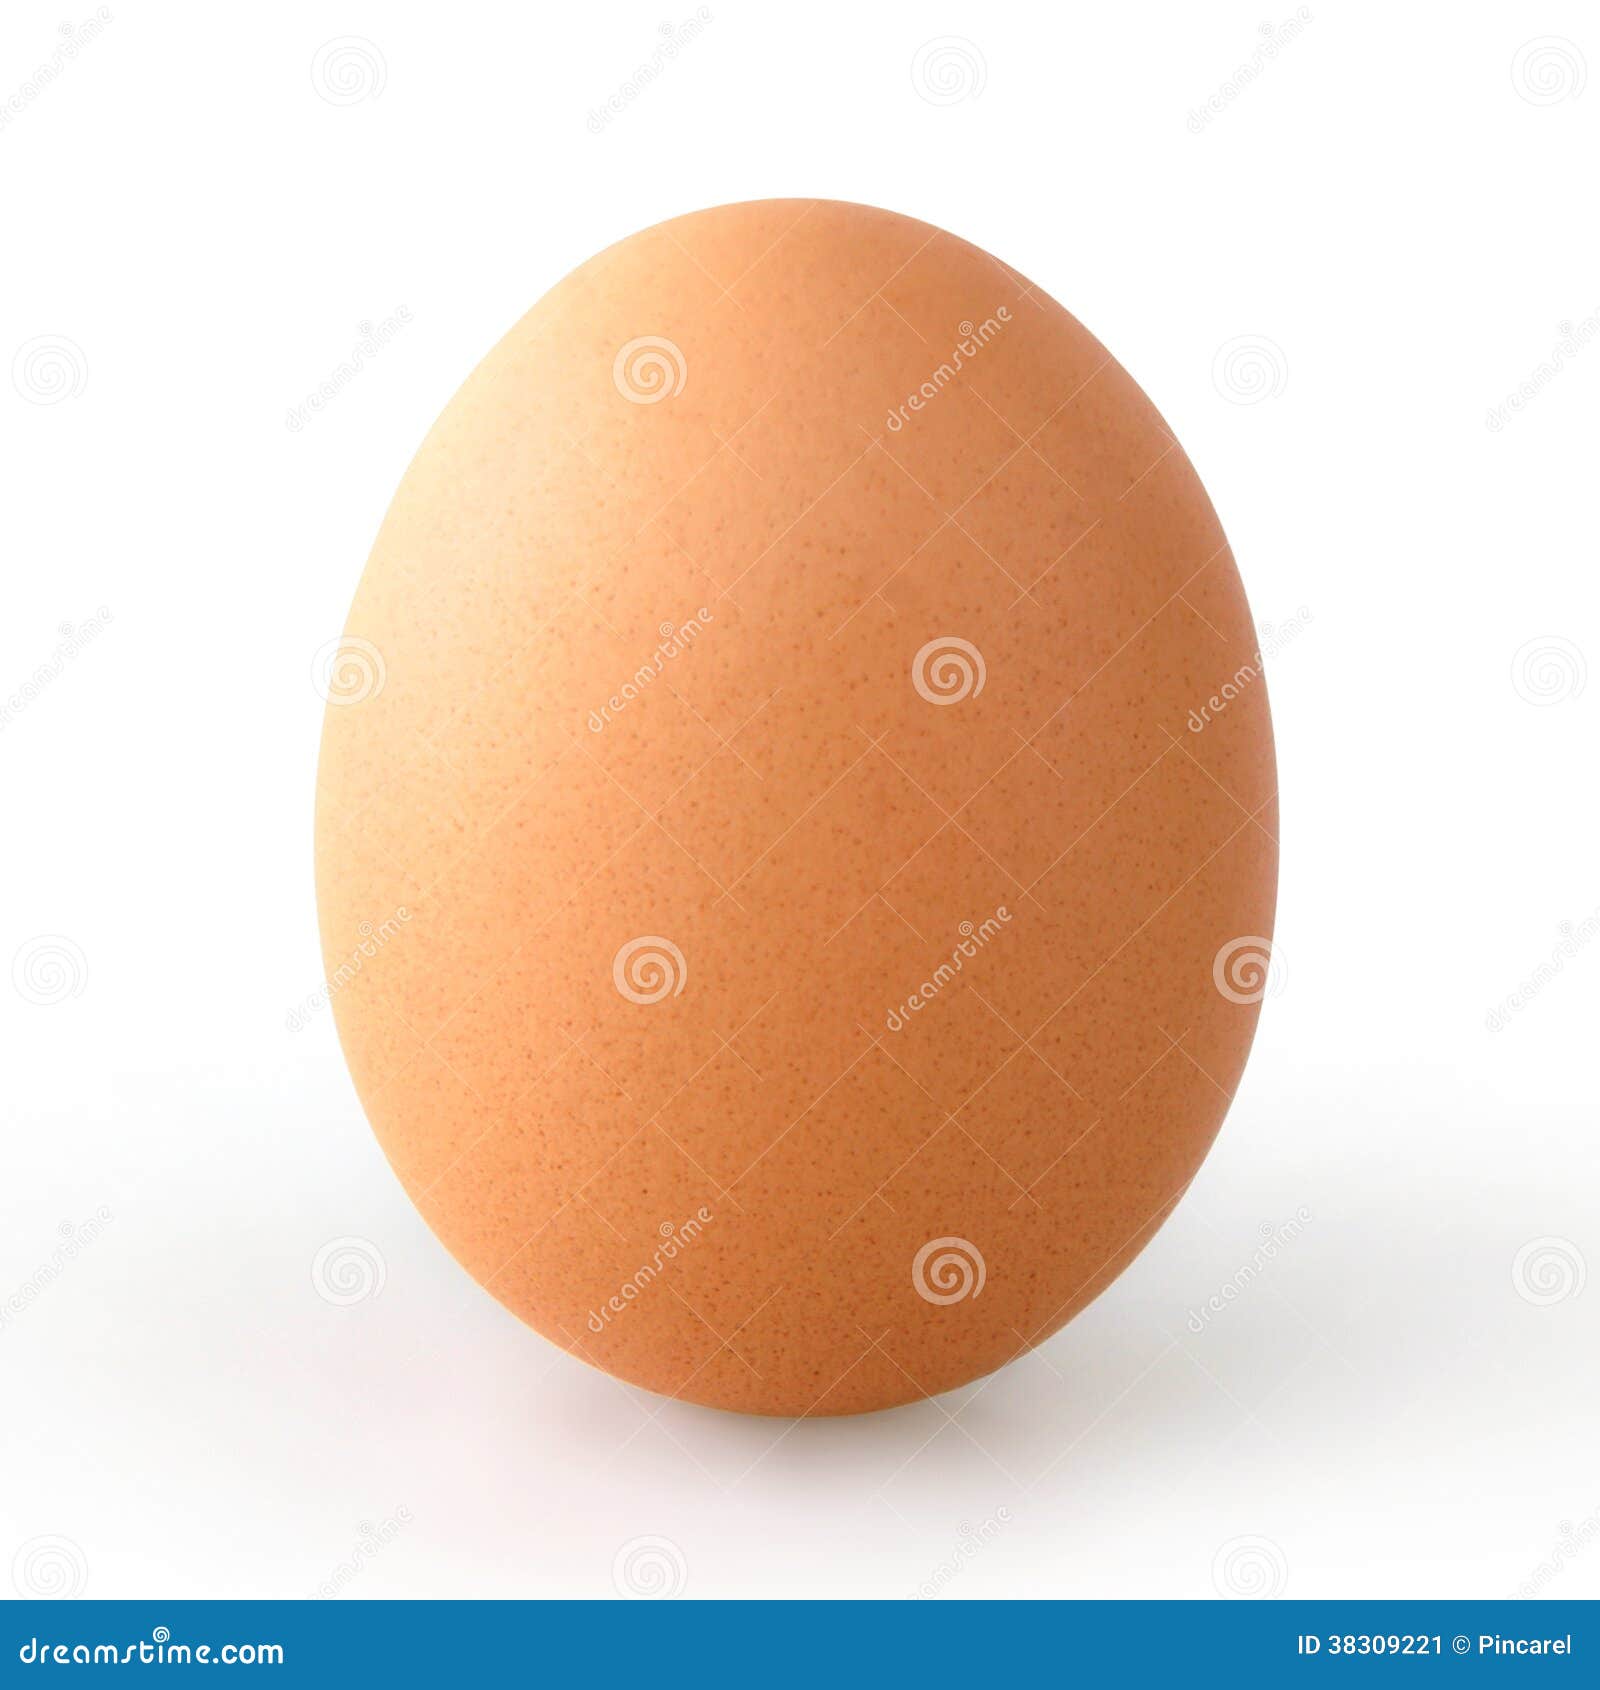 Egg stock image. Image of aliment, natural, background - 38309221